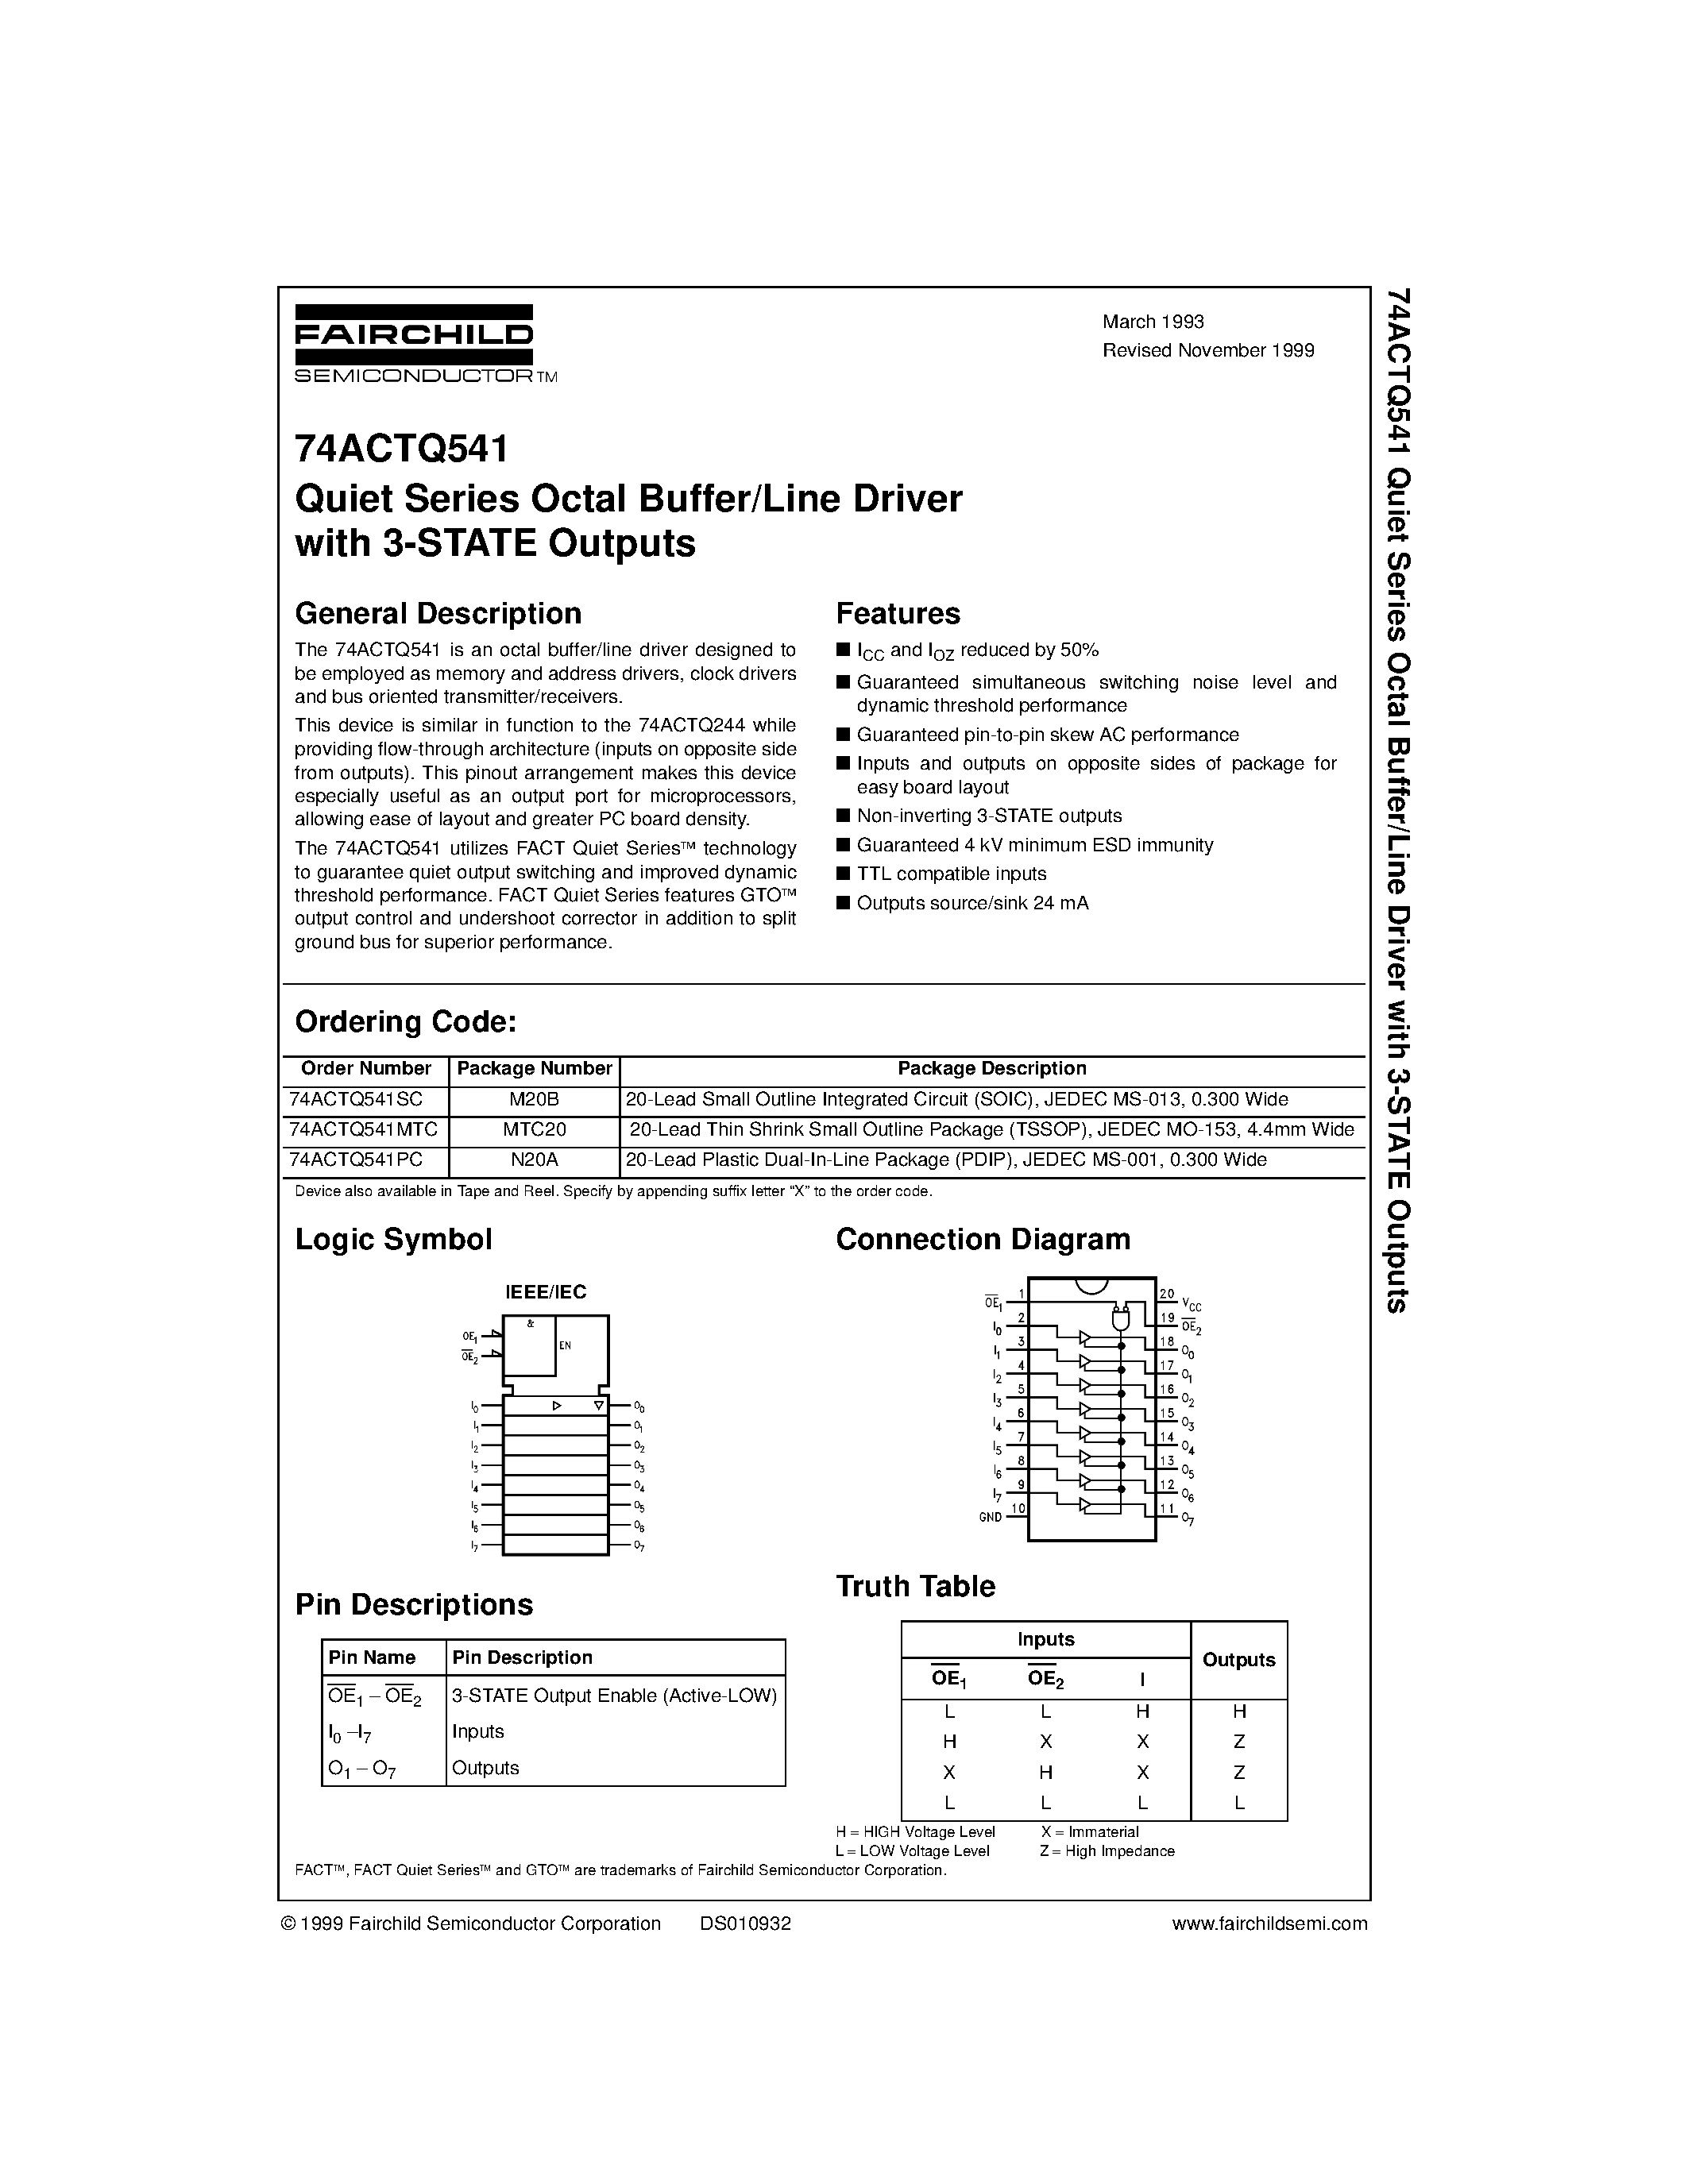 Datasheet 74ACTQ541PC - Quiet Series Octal Buffer/Line Driver with 3-STATE Outputs page 1